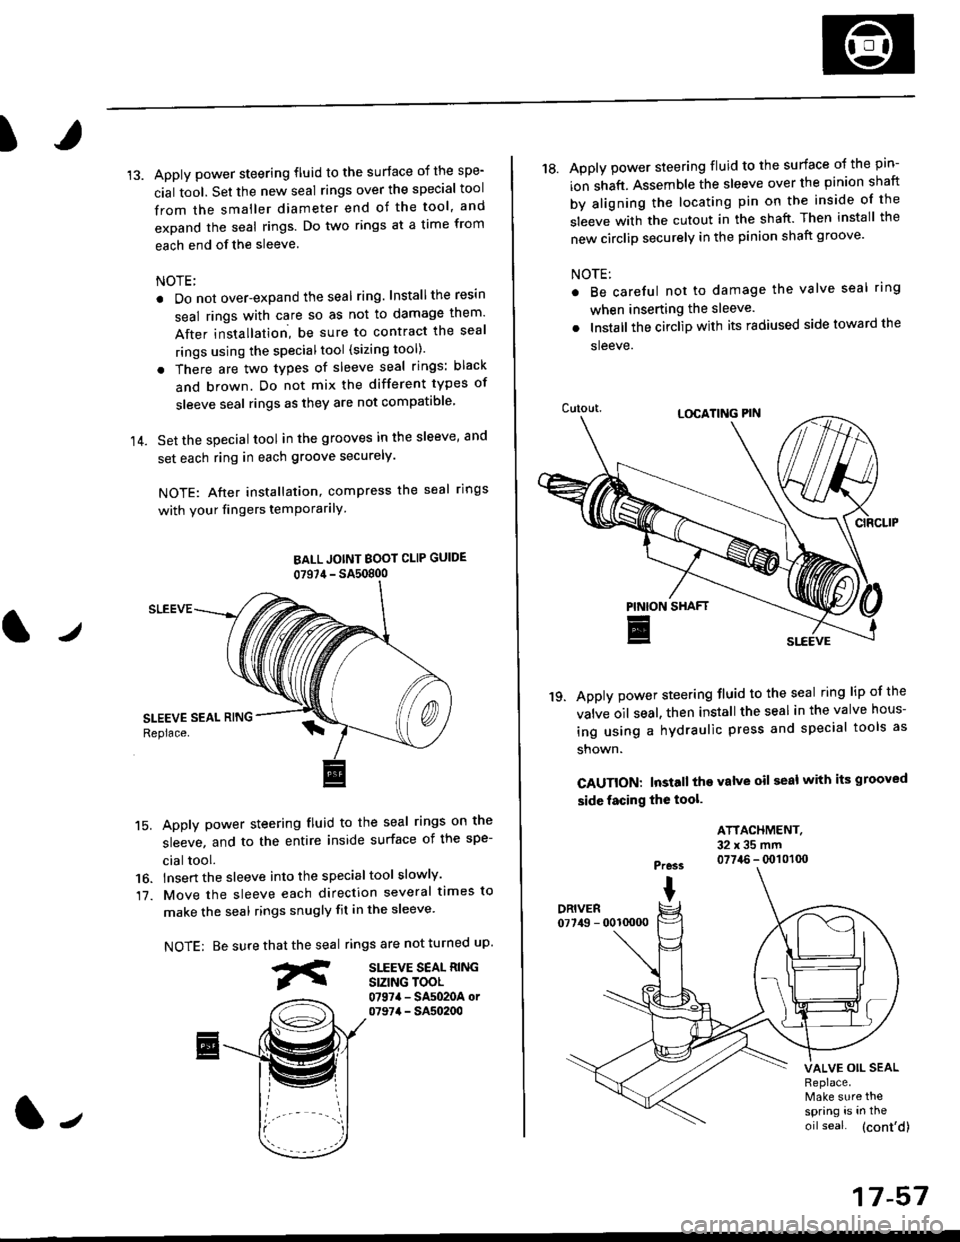 HONDA CIVIC 1996 6.G Workshop Manual I
14.
Apply power steering fluid to the surface of the spe-
cial tool. Set the new seal rings over the special tool
from the smaller diameter end of the tool, and
expand the seal rings. Do two rings a